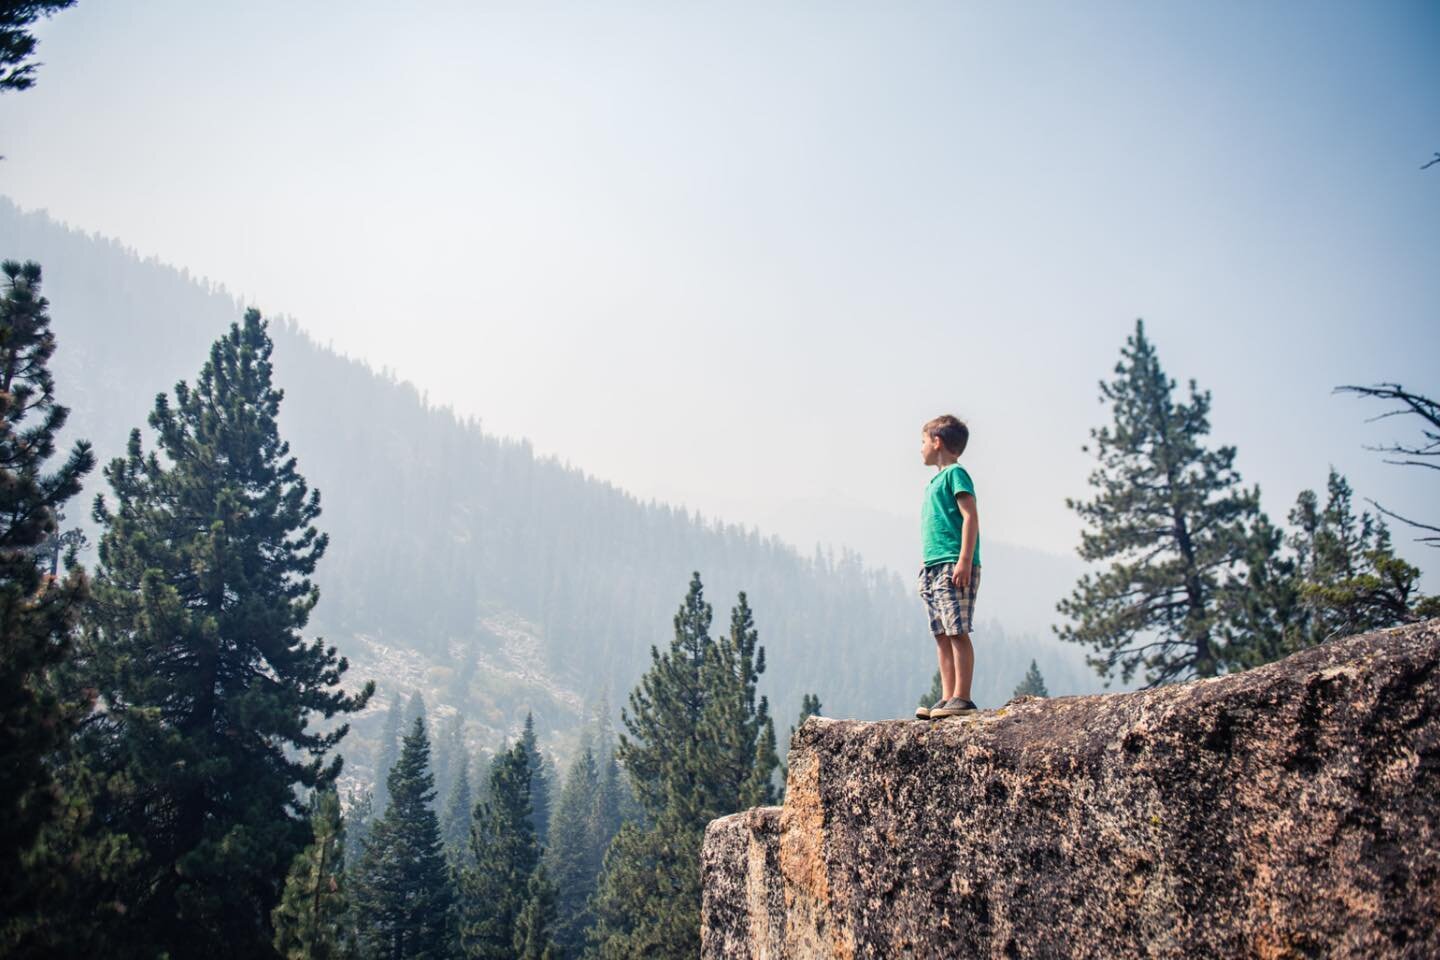 Kids and the Outdoors: How to Raise a Hiker 🏞

I get asked this question all the time. &ldquo;How do I raise a hiker?&rdquo; 

Here is something to consider:

&ldquo;Going outside&nbsp;with&nbsp;your kids can make all the difference between a forced